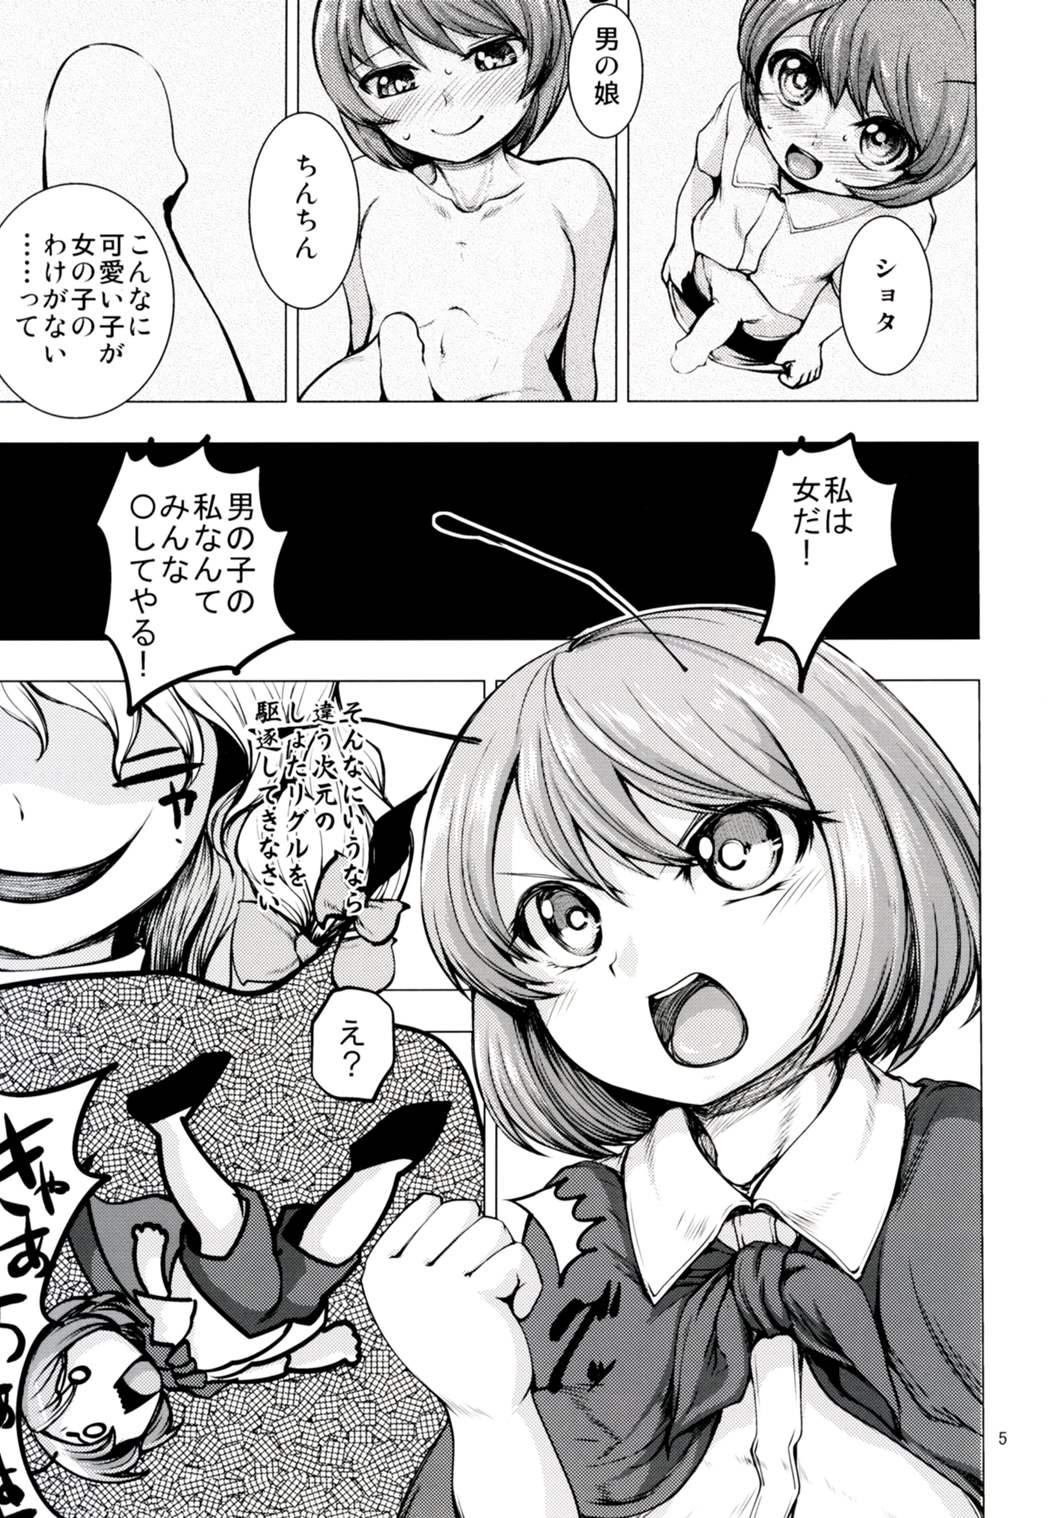 Horny FEMALE MALE - Touhou project Small Tits Porn - Page 3